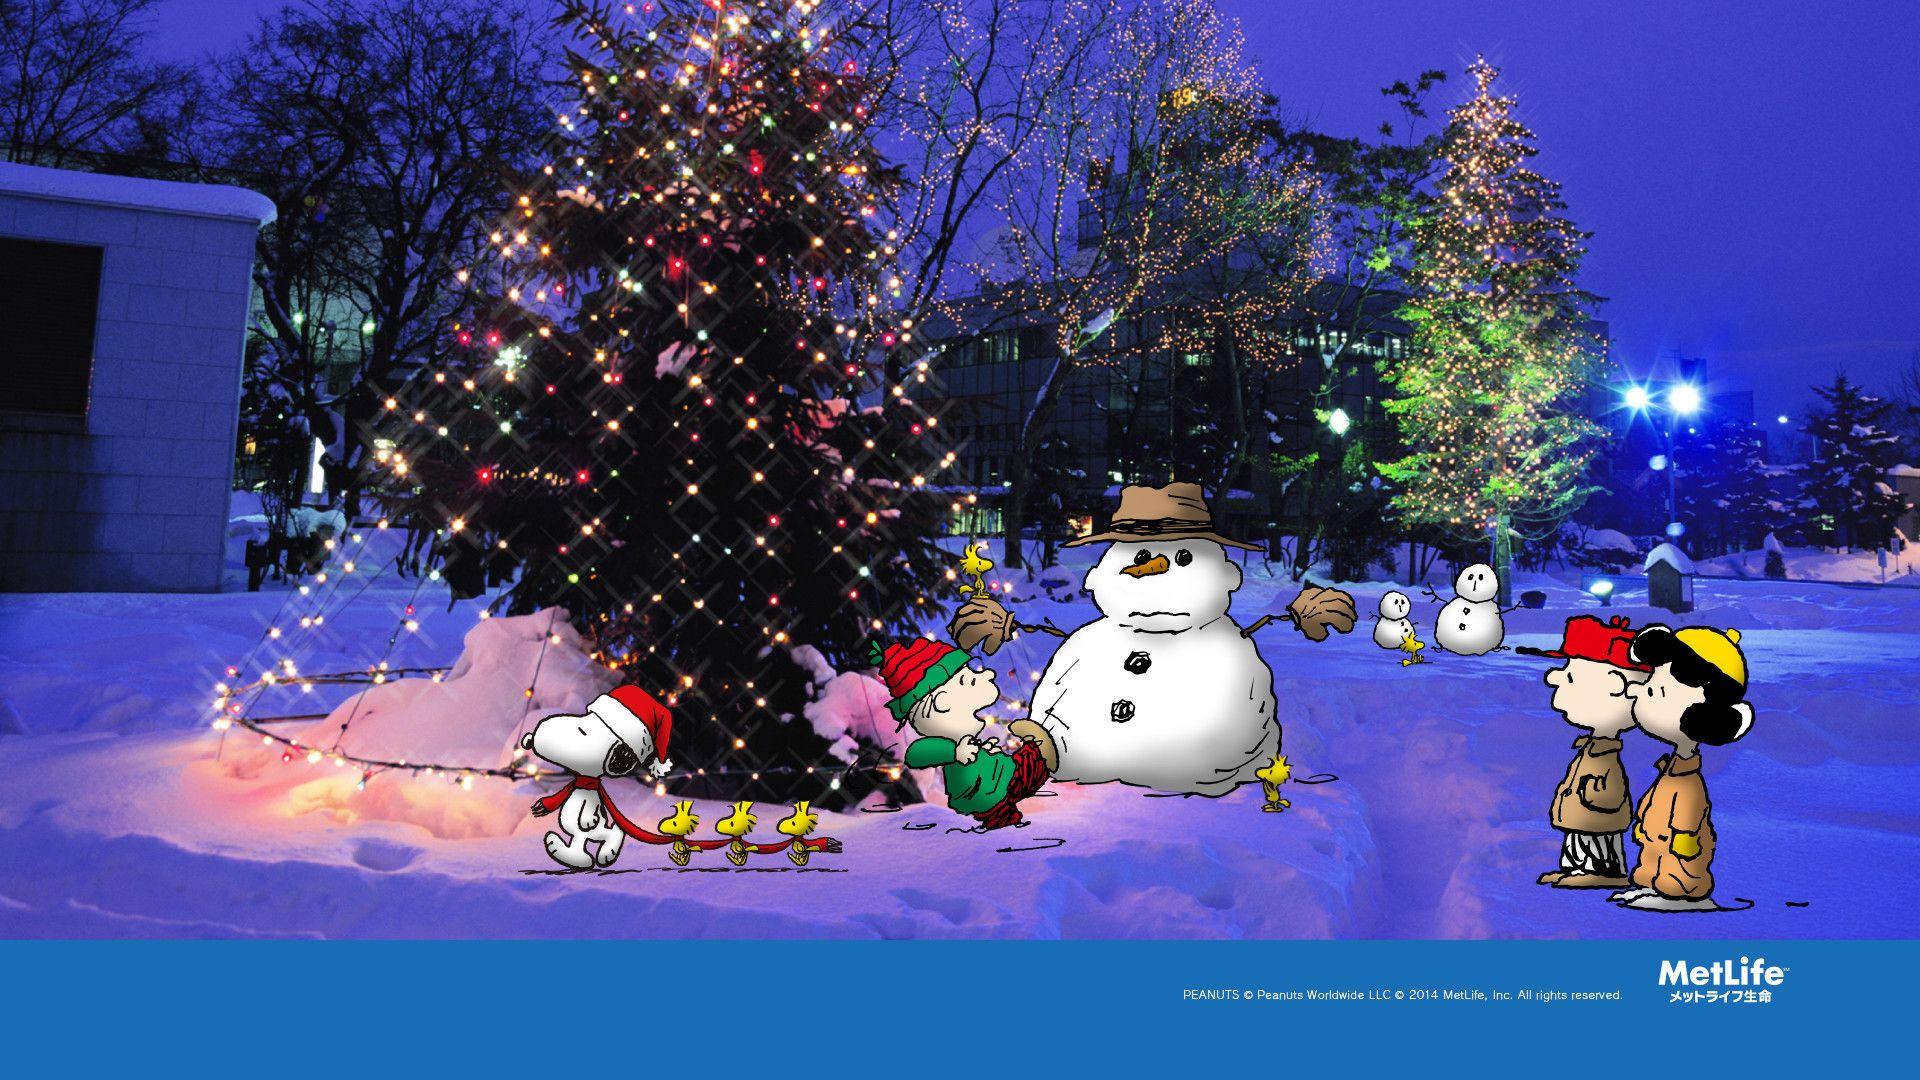 snoopy winter wallpapers top free snoopy winter on the peanuts winter wallpapers